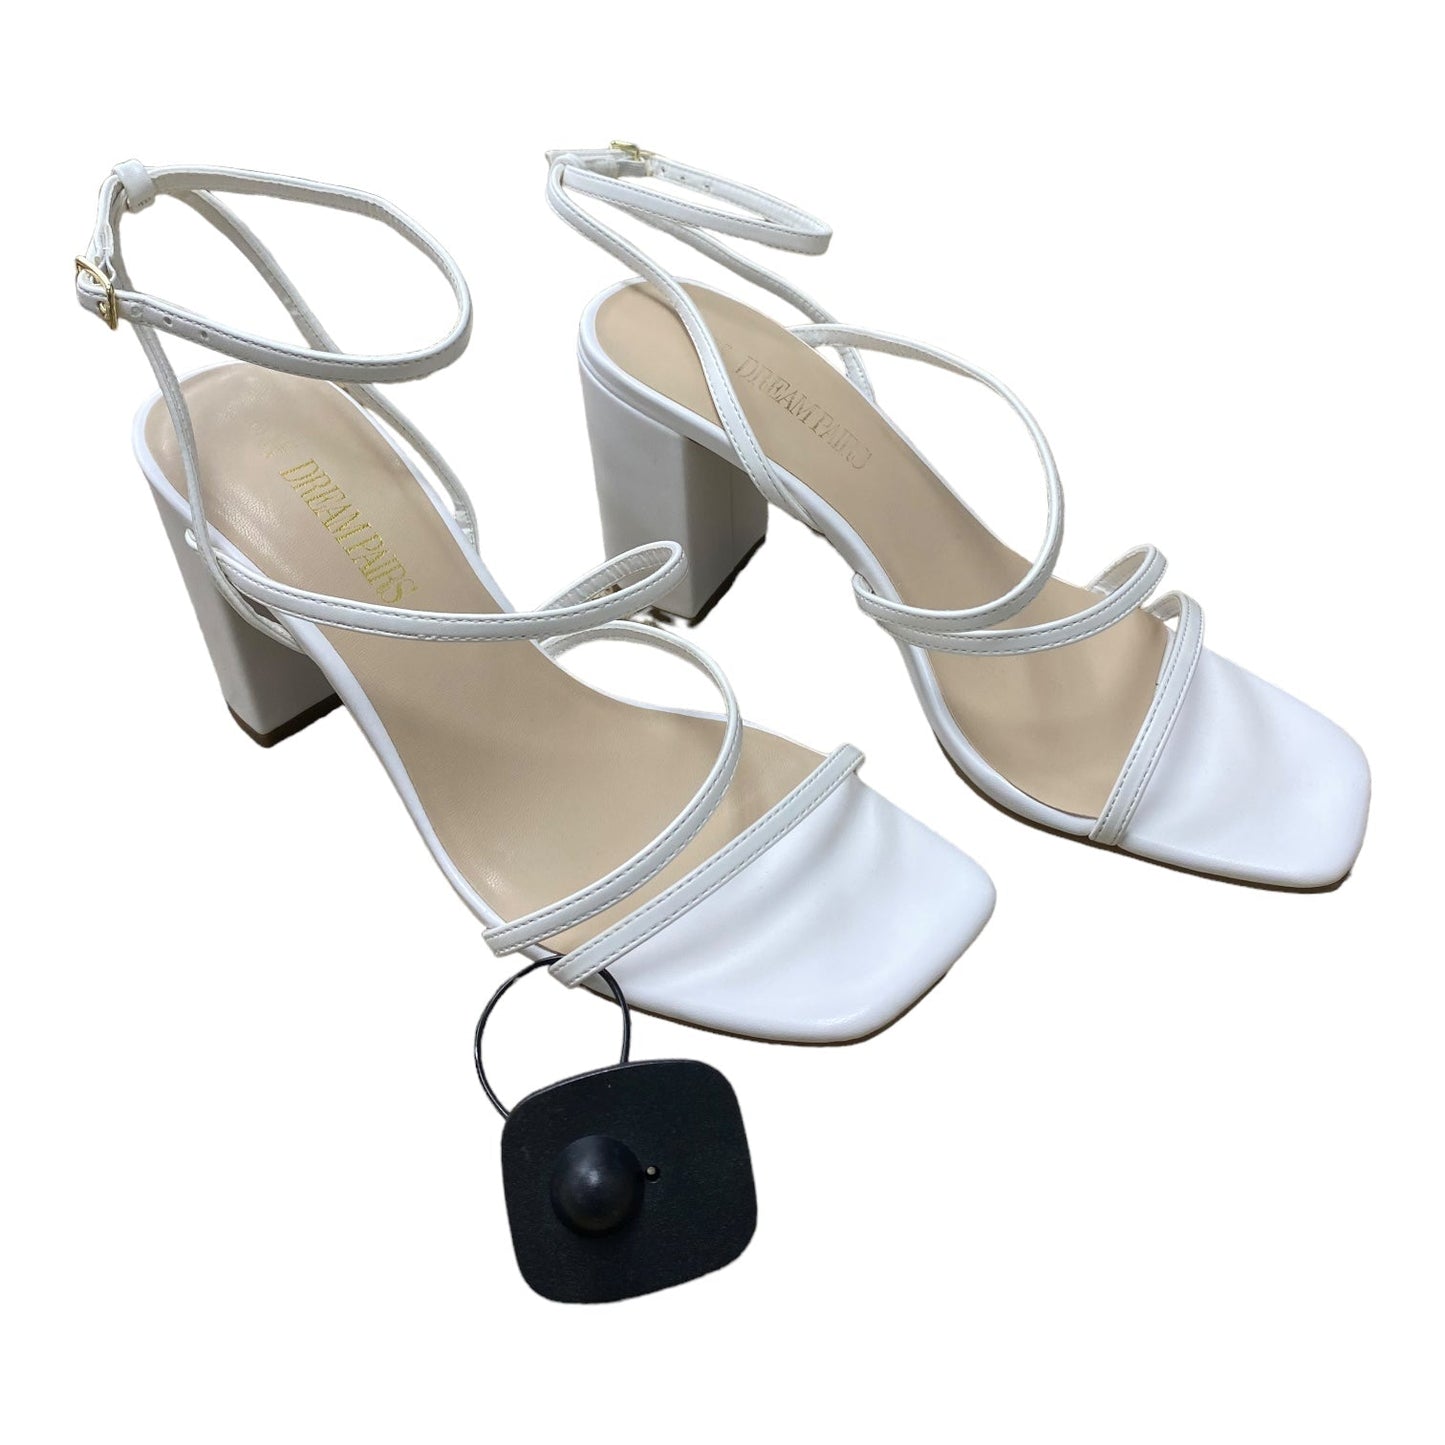 White Shoes Heels Block Dream Pairs, Size 8